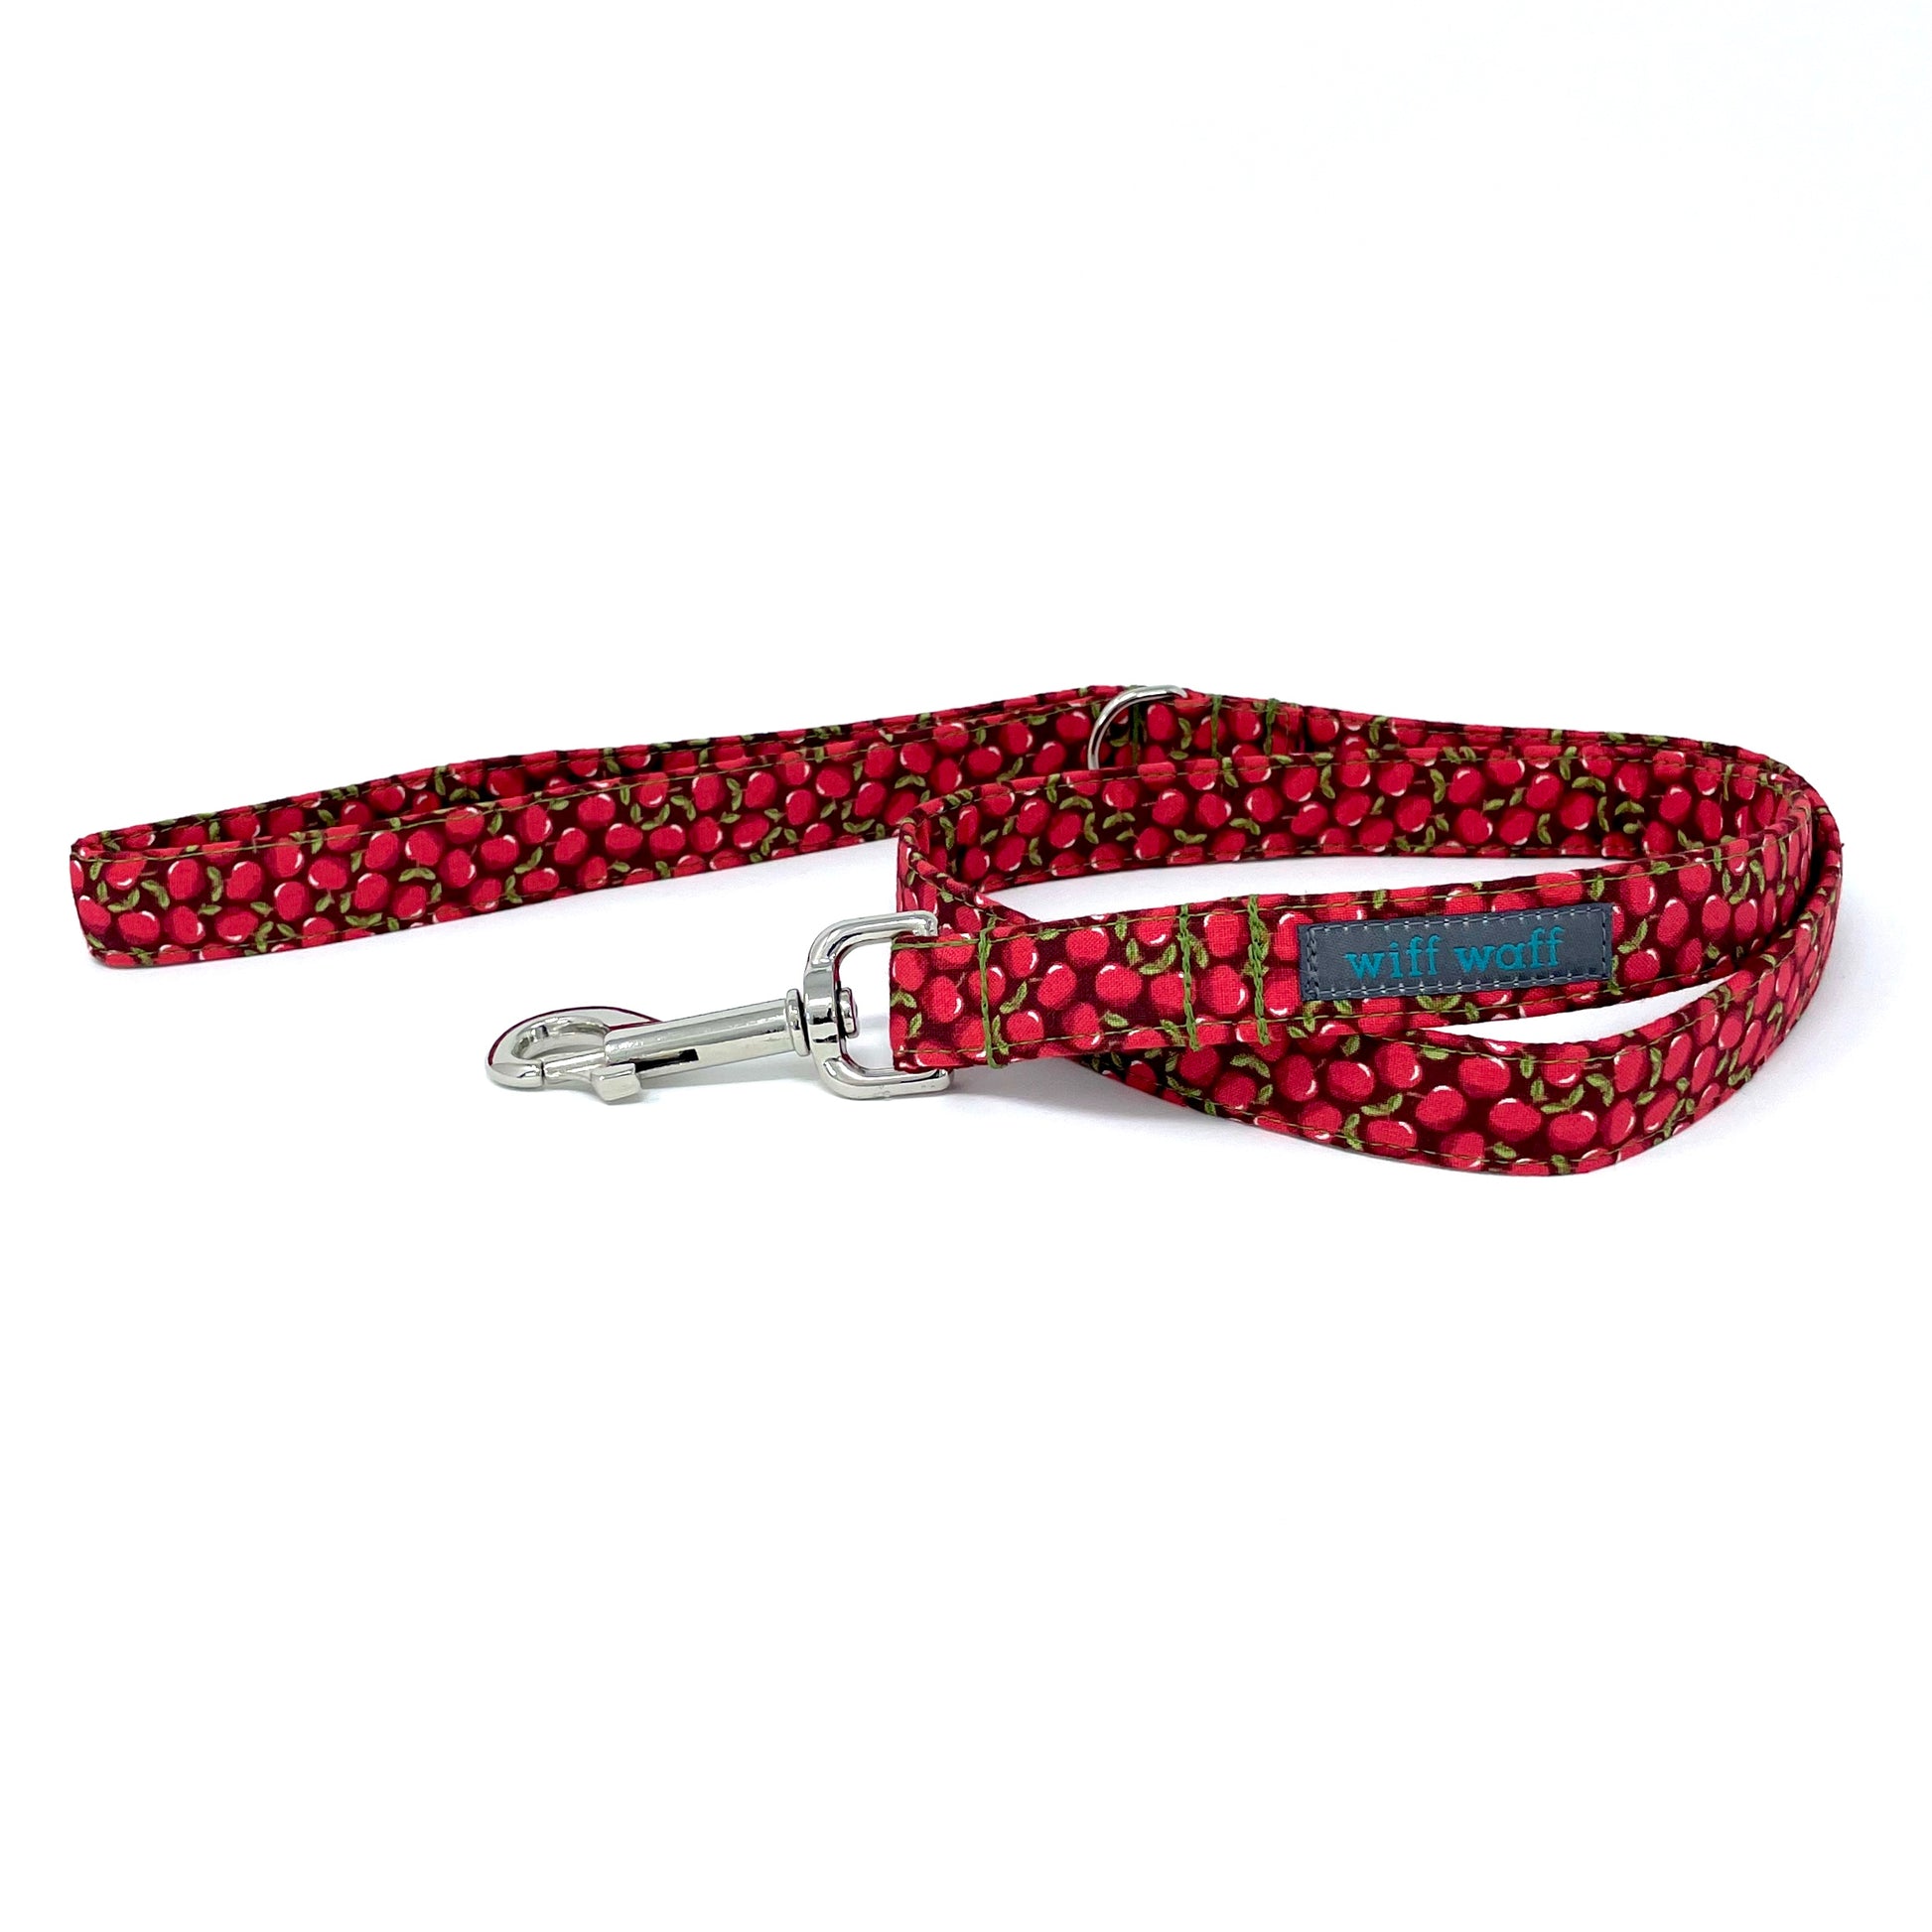 A coiled up handcrafted fabric dog lead in a red apple print on a dark background with green stitching and chrome clip and d ring. Handcrafted by wiff waff designs in nottingham